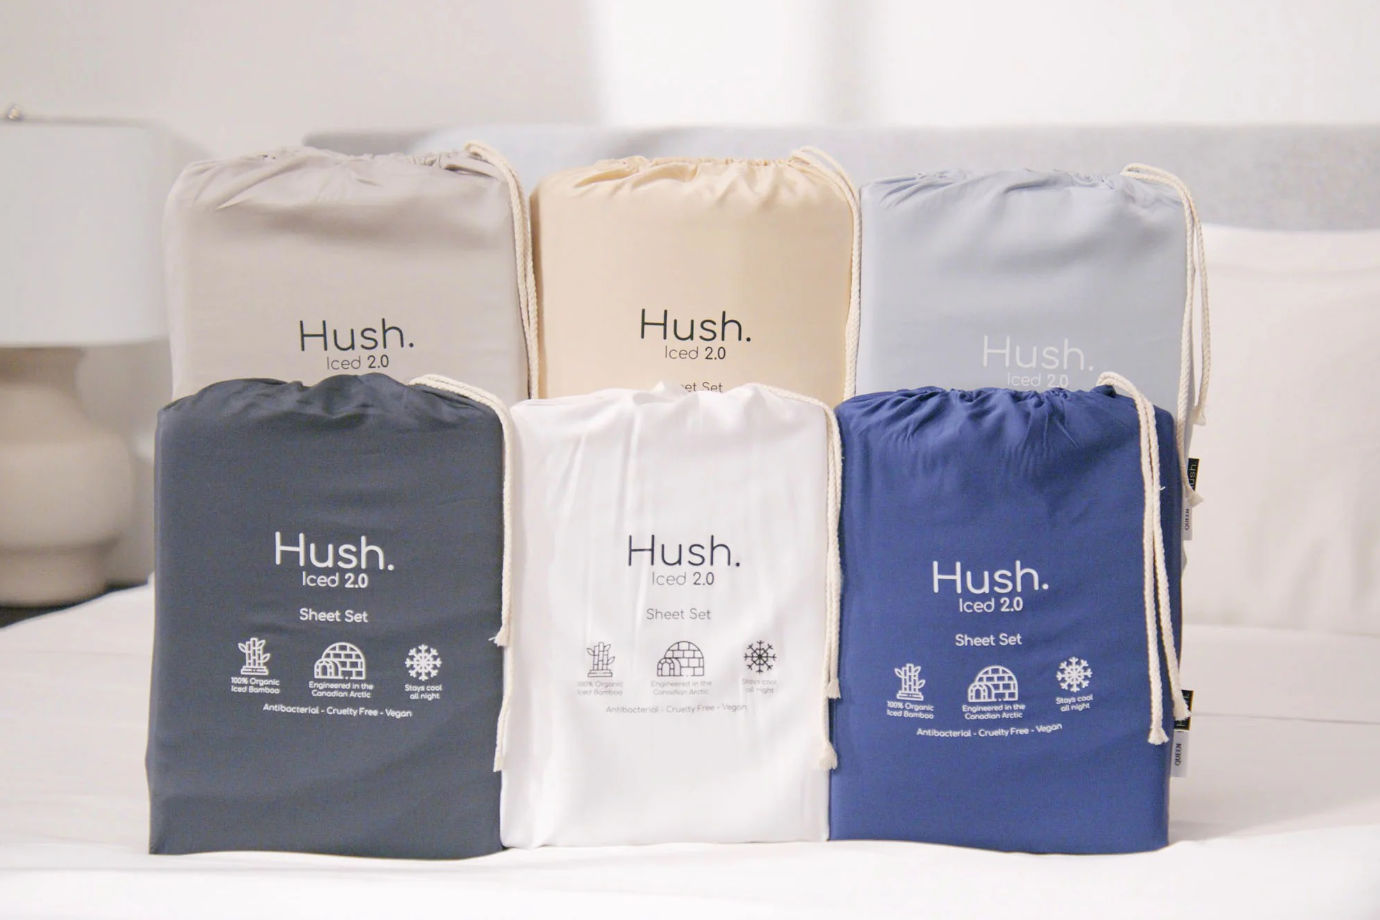 All available colors of Hush Sheets and Pillowcase Set packed in their respective cloth bags.